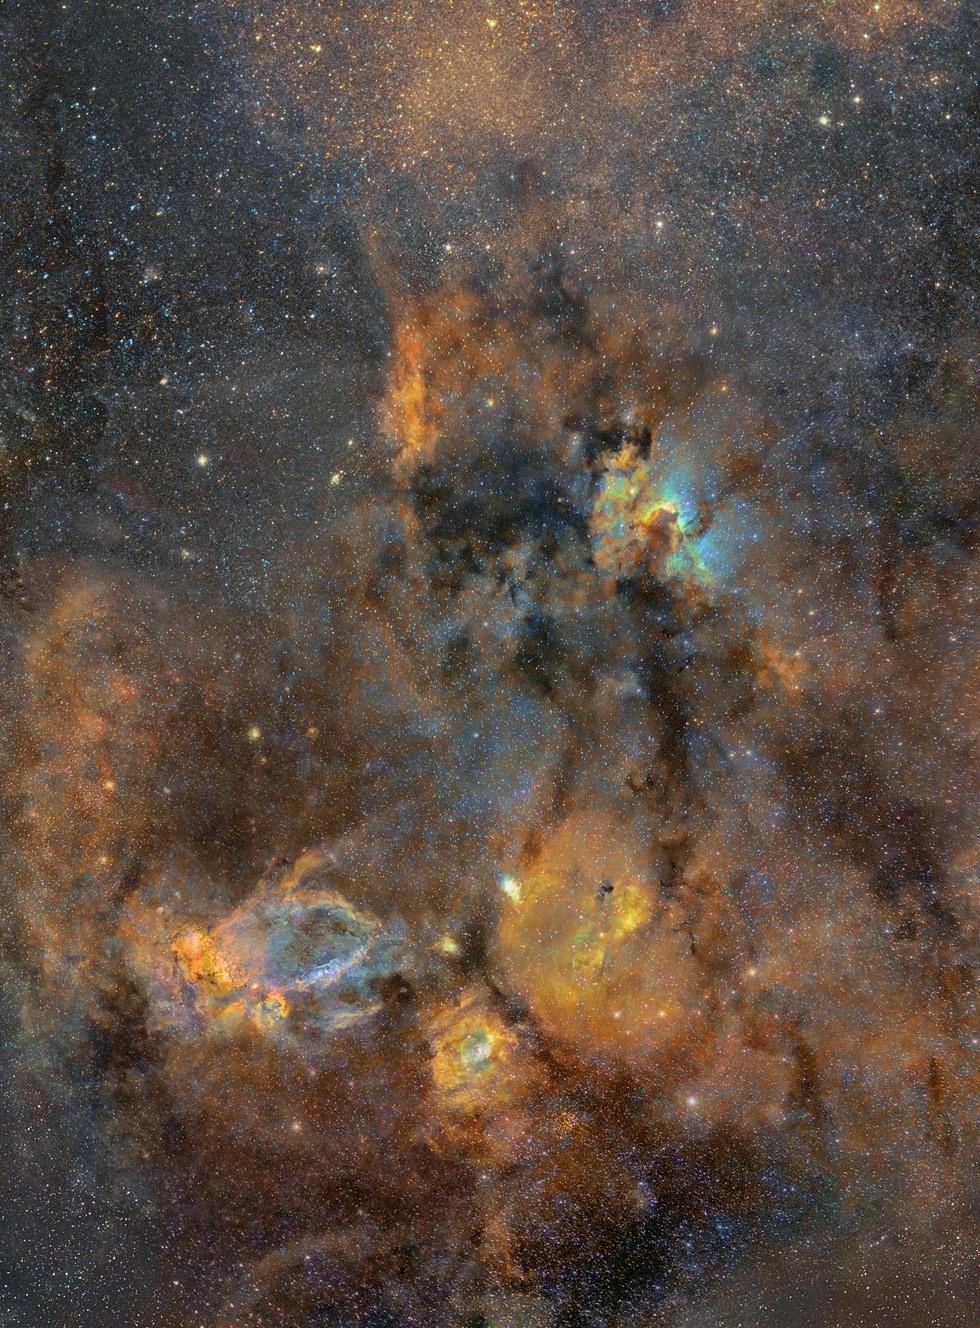 A ten panel mosaic from the constellation Cepheus took a total exposure time of 82 hours. (Courtesy of <a href="https://astroanarchy.blogspot.com/">J-P Metsavainio</a>)